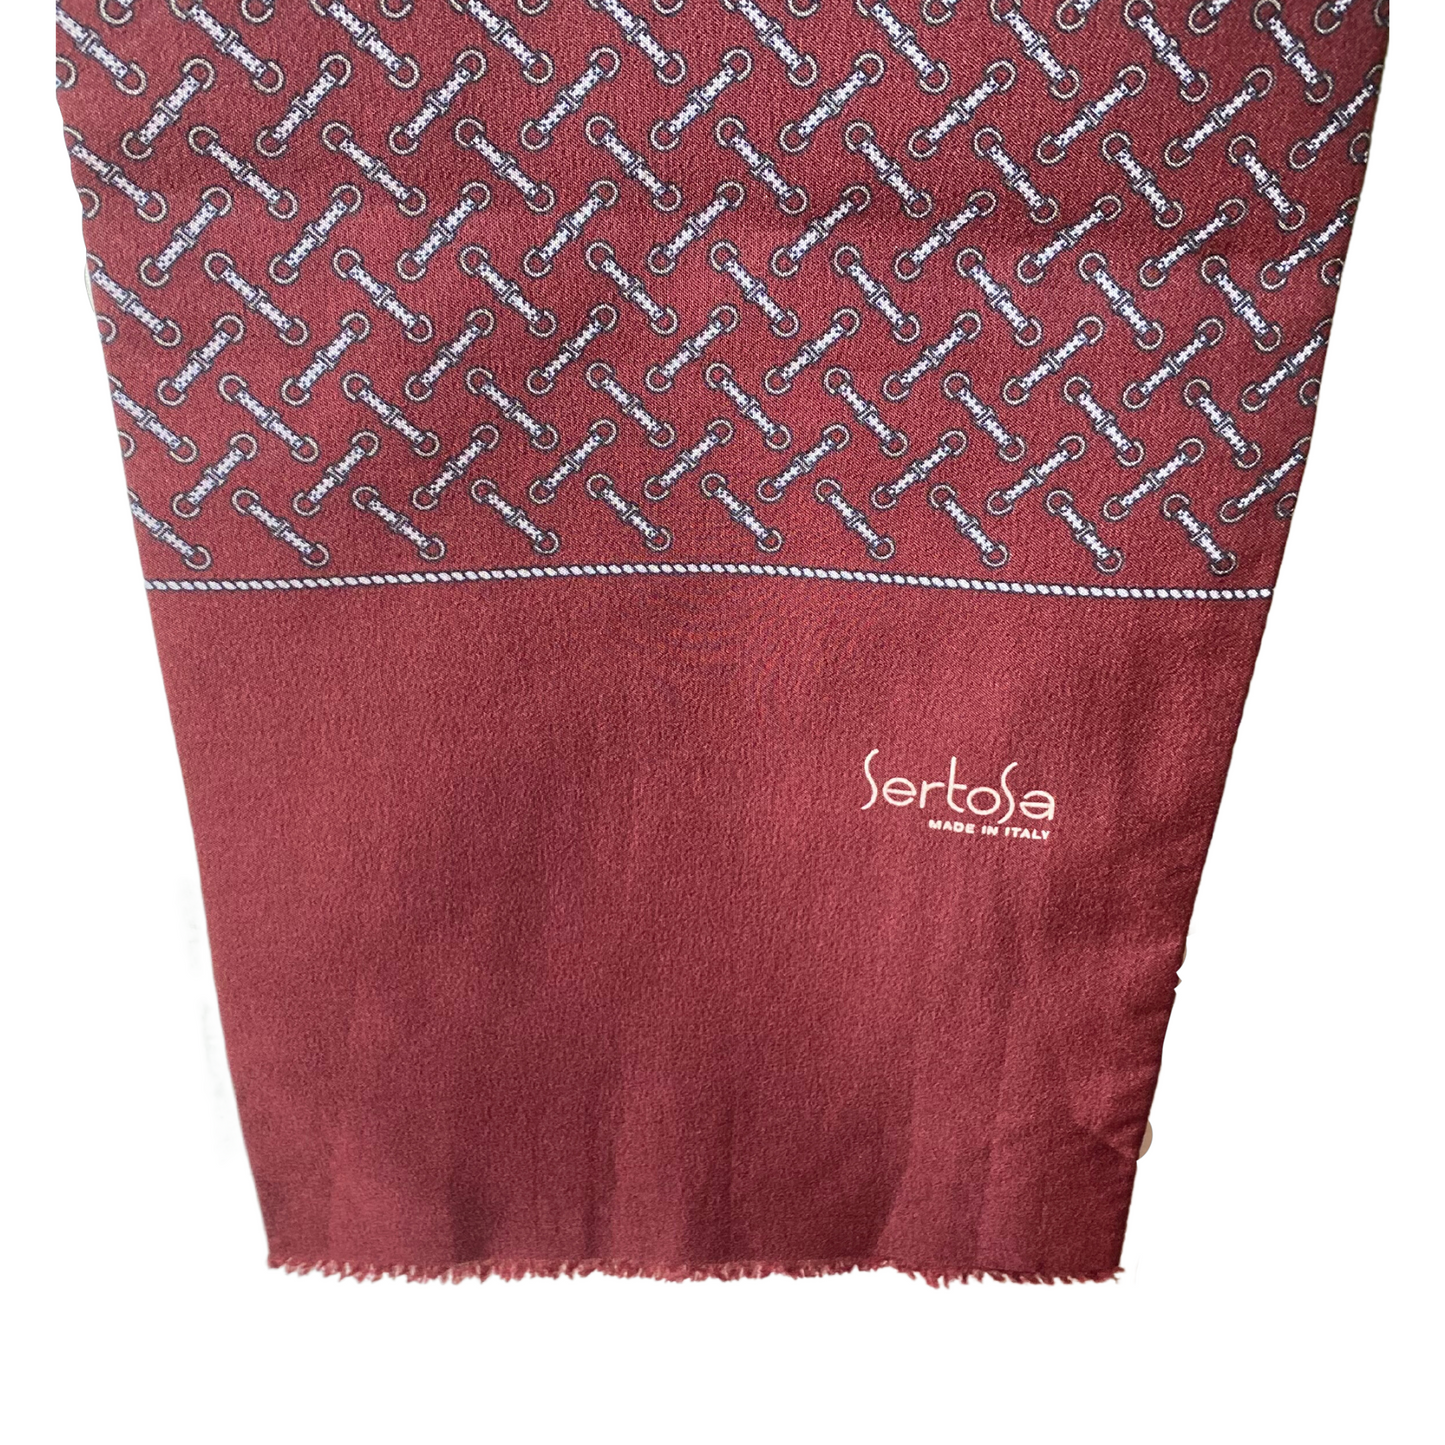 Vintage Sertosa scarf - Luxurious and comfortable to wear.